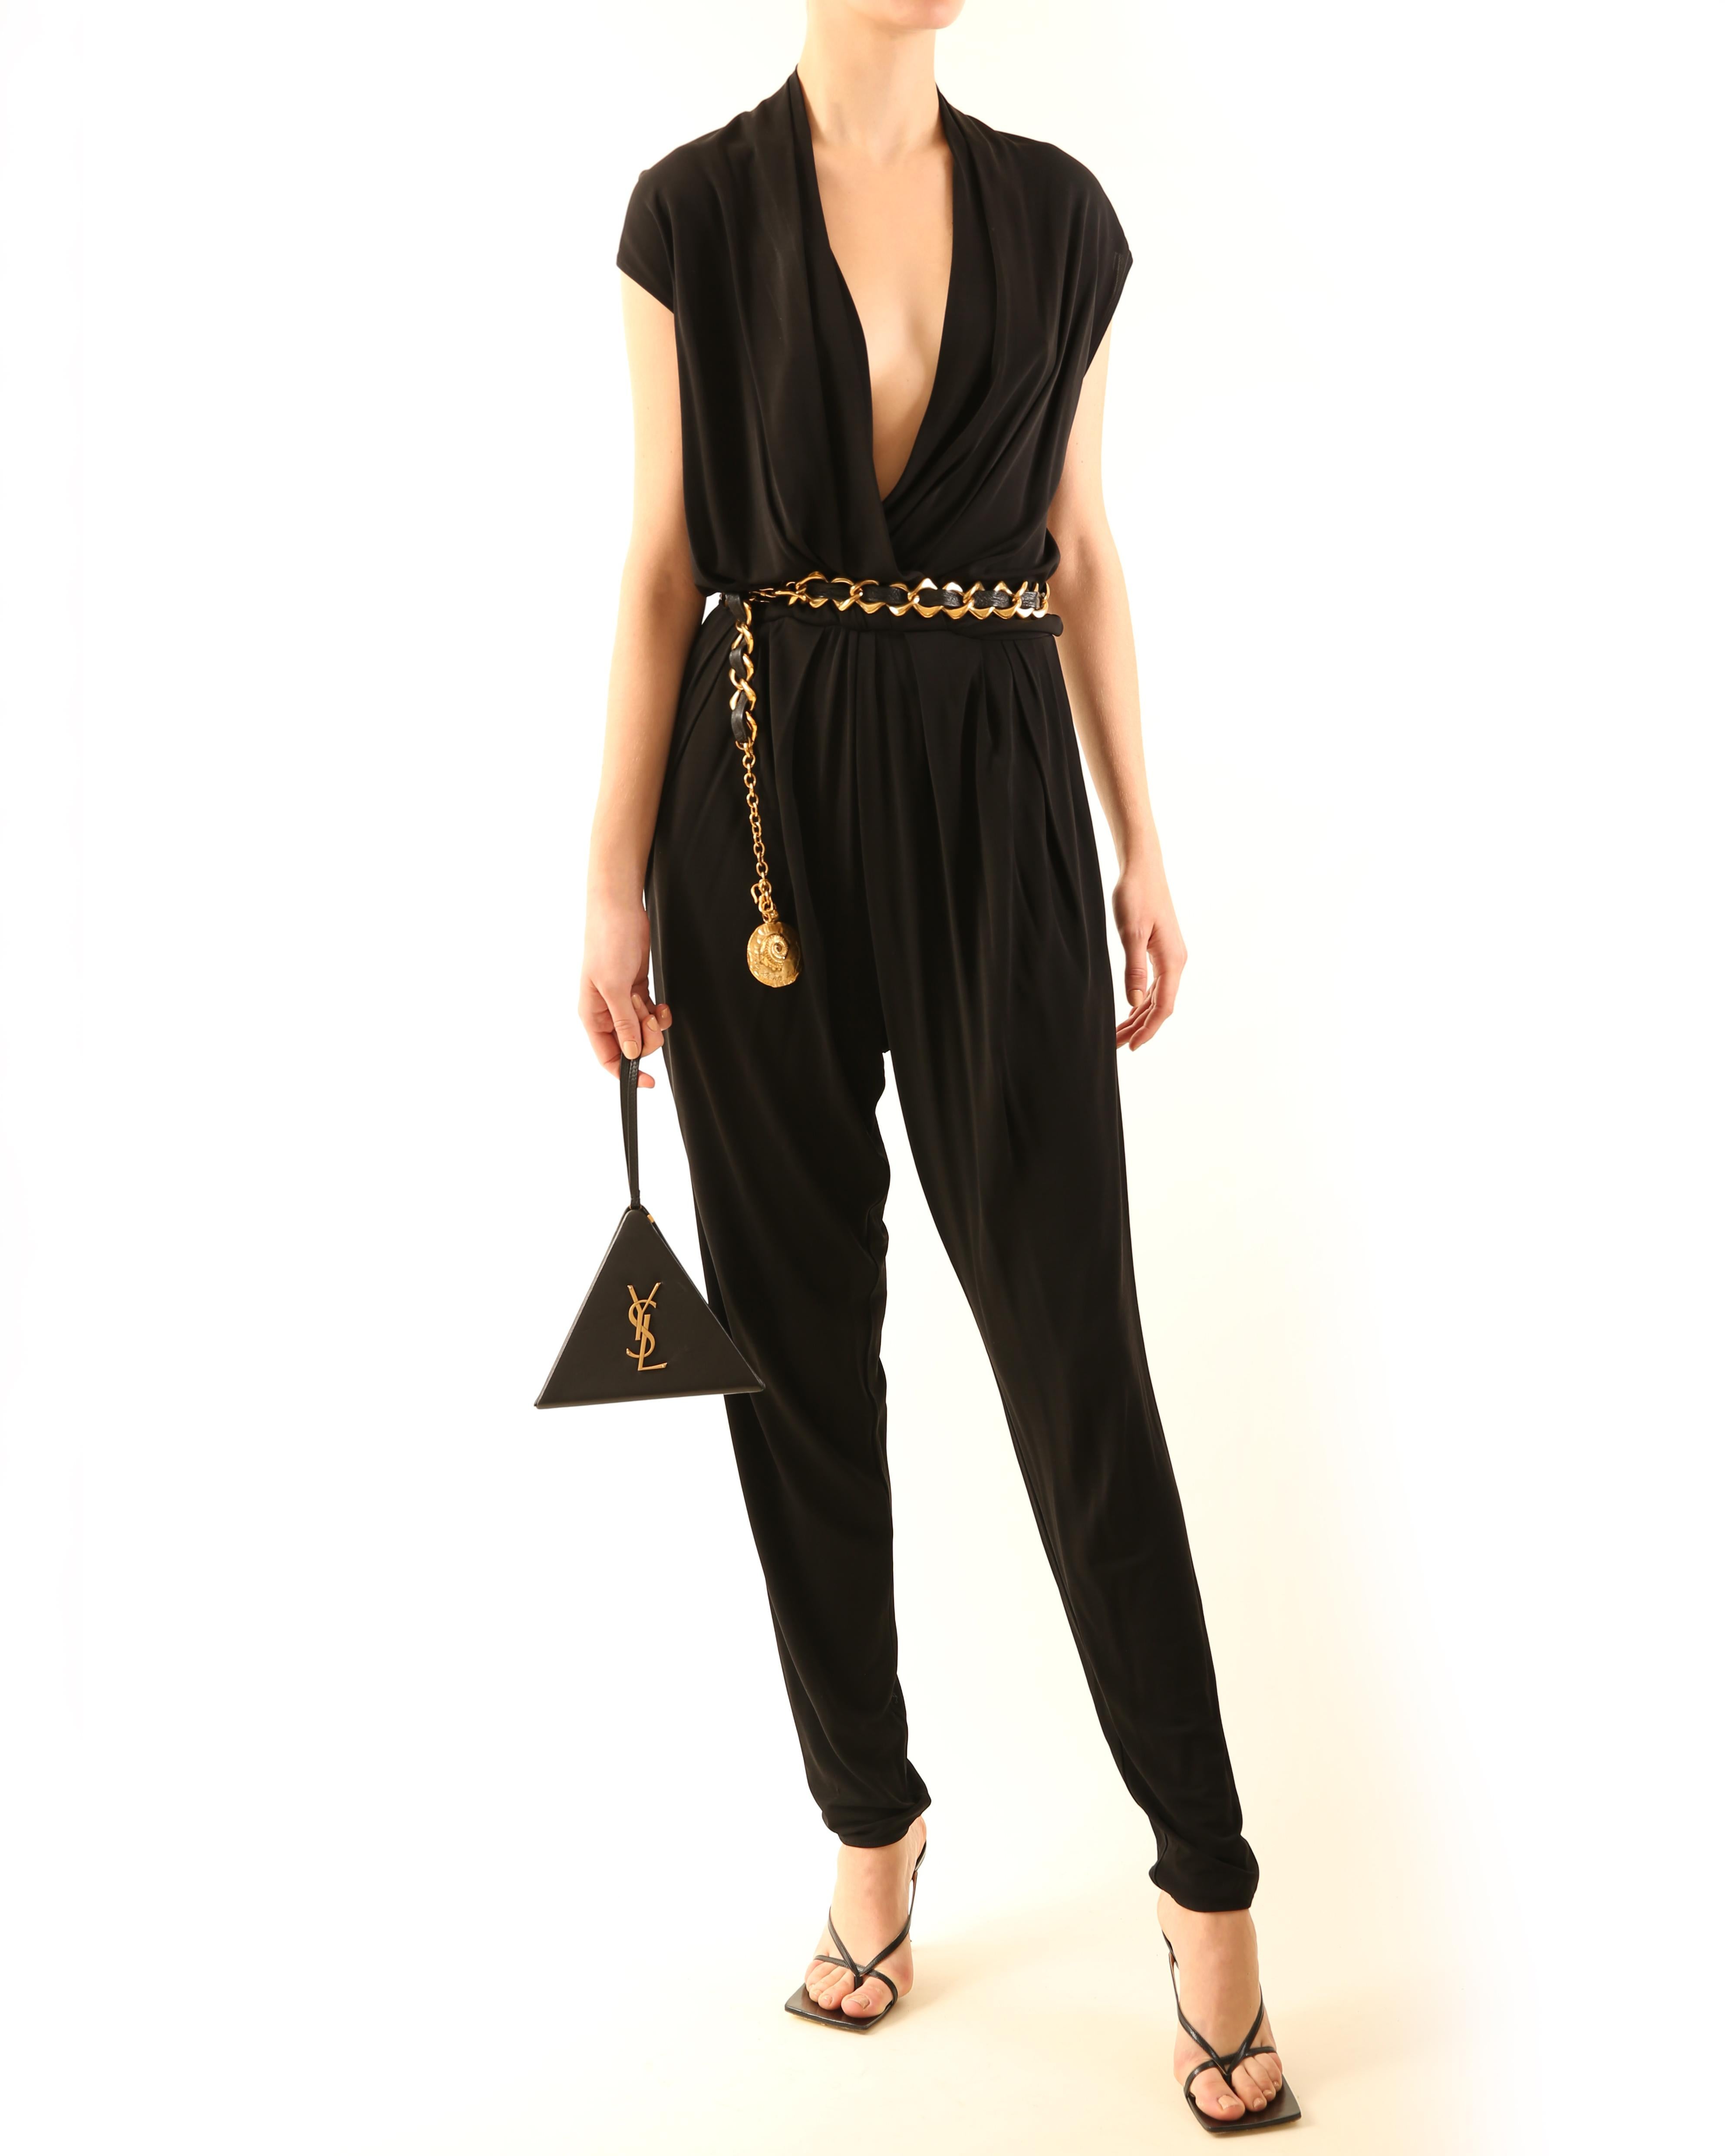 Lanvin black plunging neckline low cut sleeveless tapered pant jumpsuit  In Excellent Condition For Sale In Paris, FR